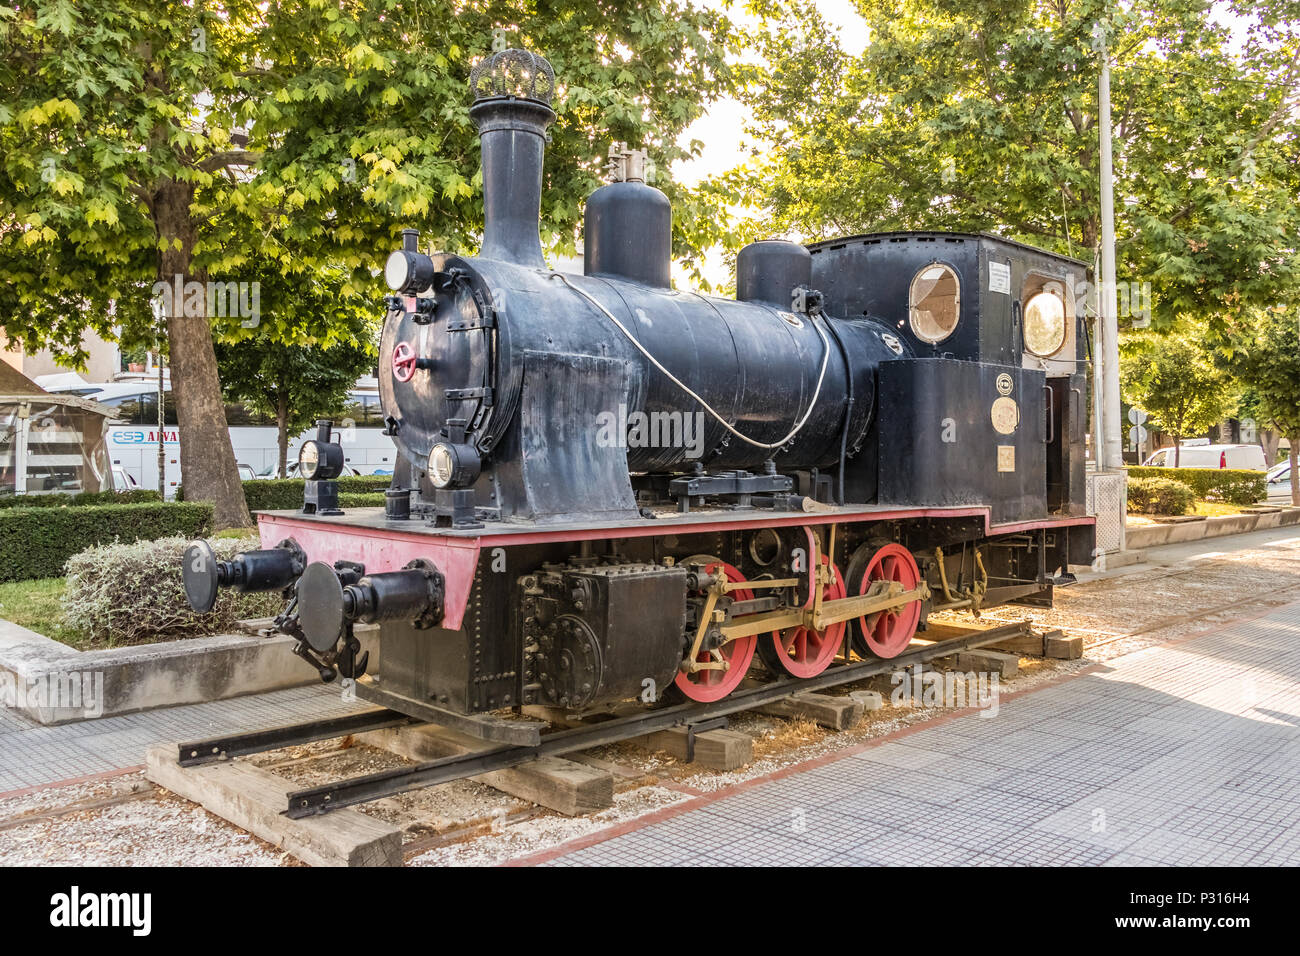 Larissa, Greece - June 11th, 2018: An old locomotive made by the Krupp company in 1935 placed at Platia Ose next to the Larissa train station. Stock Photo